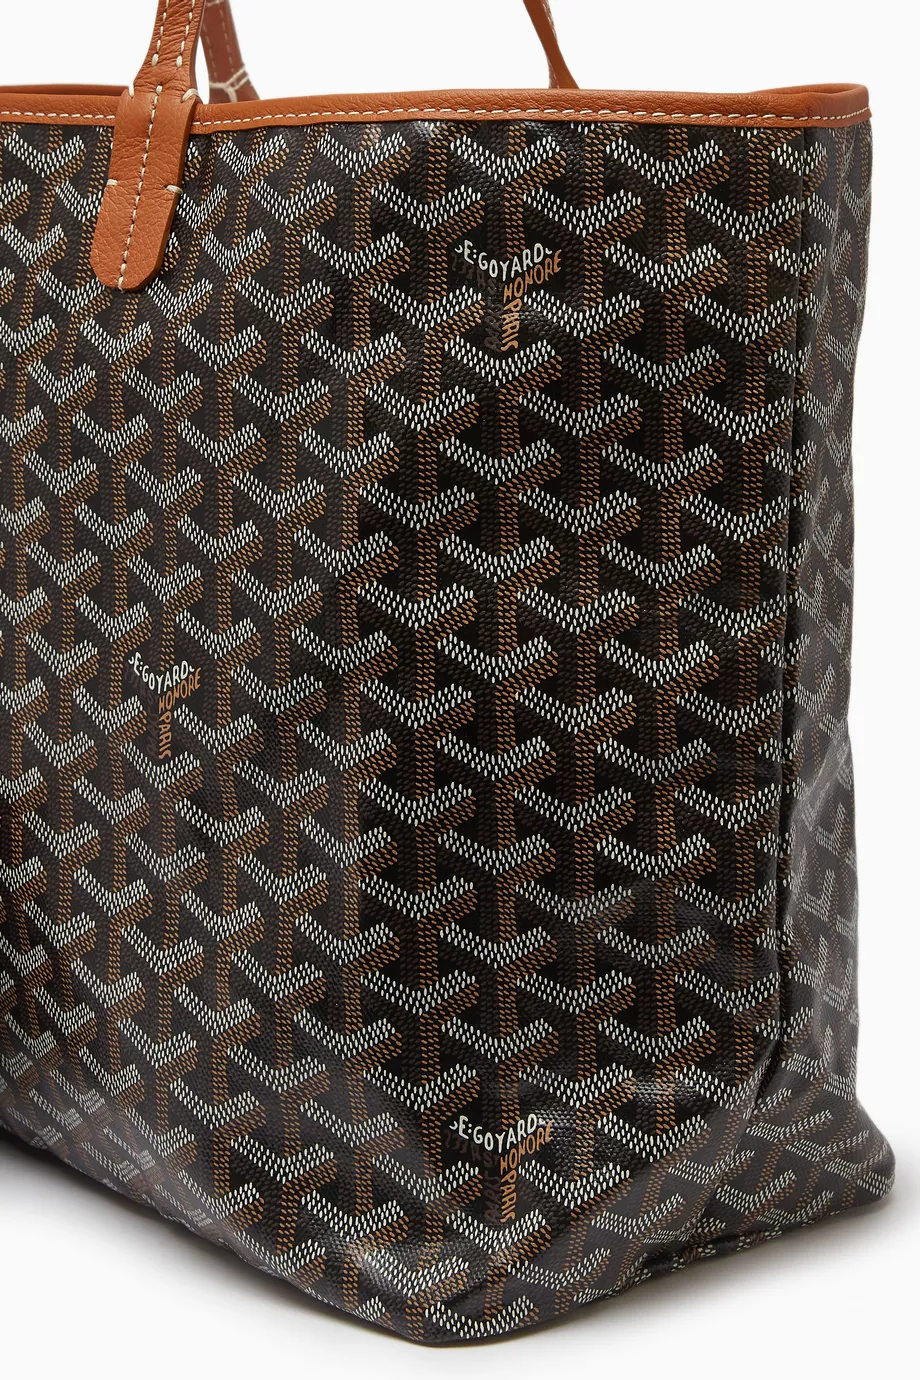 Doha.Closet - Goyard tote Bag (all colors available) Brand new Complete  inclusion QAR 6,000.00 Php 81,000.00 Pre order